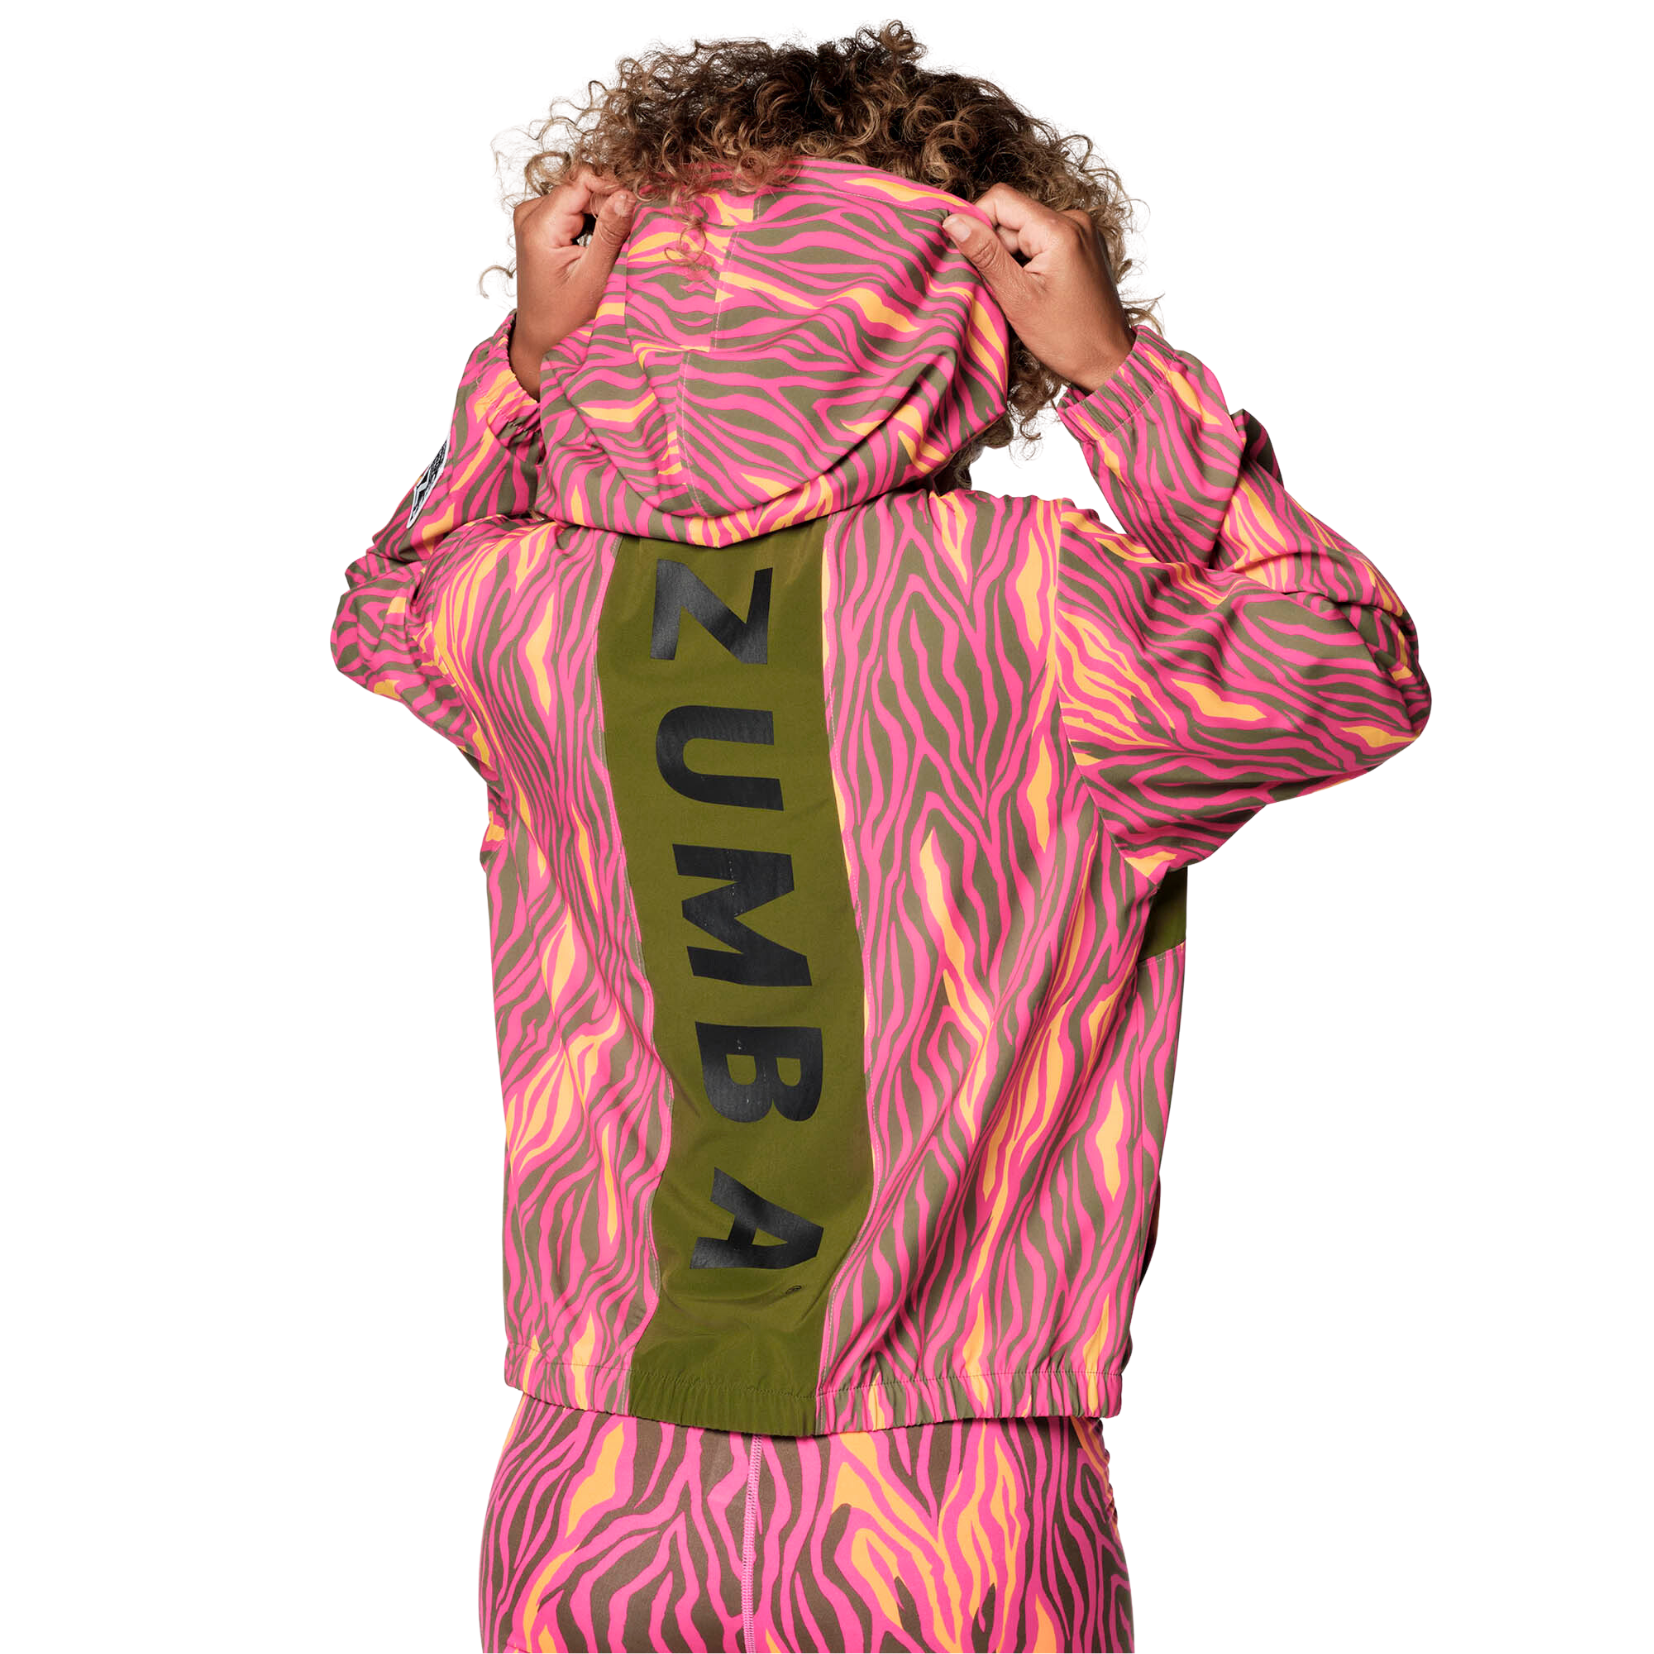 Zumba Chillin' Zip-Up Track Jacket (Special Order)